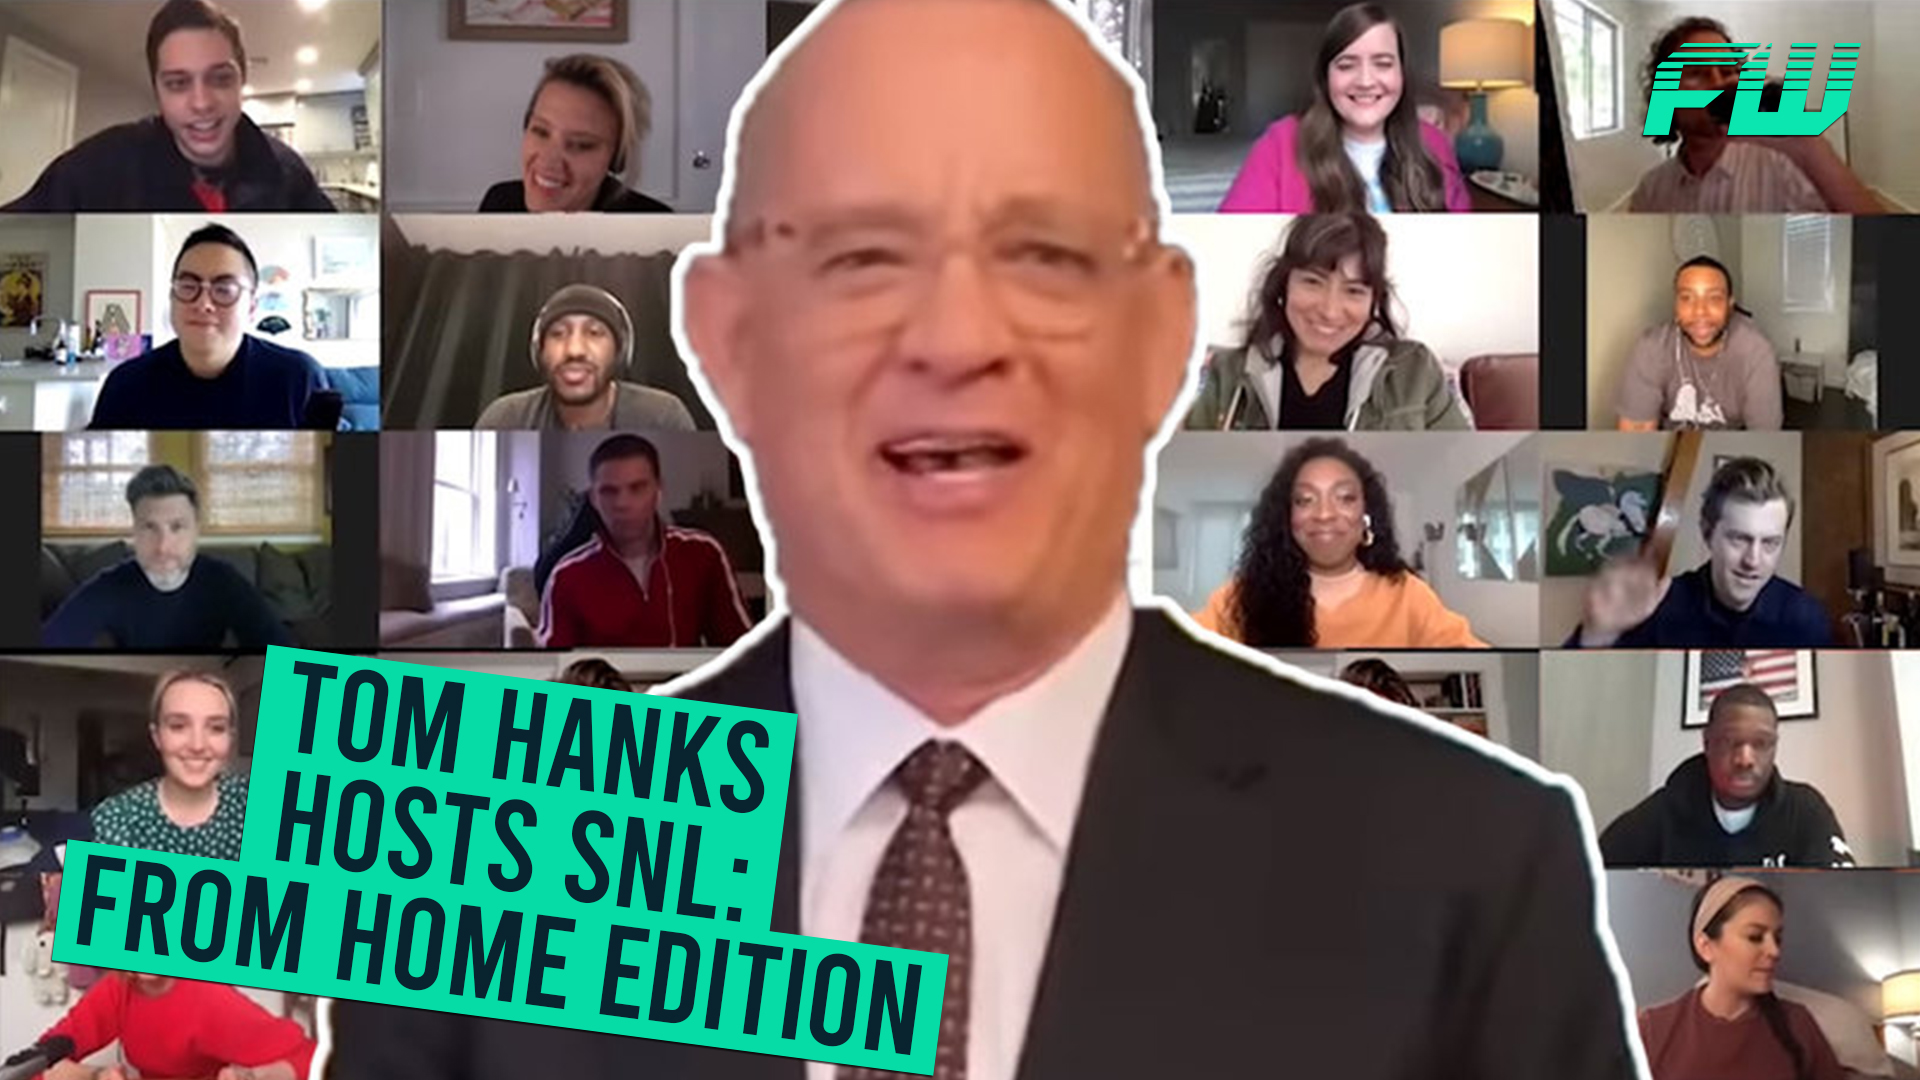 Tom Hanks hosts SNL From Home Edition